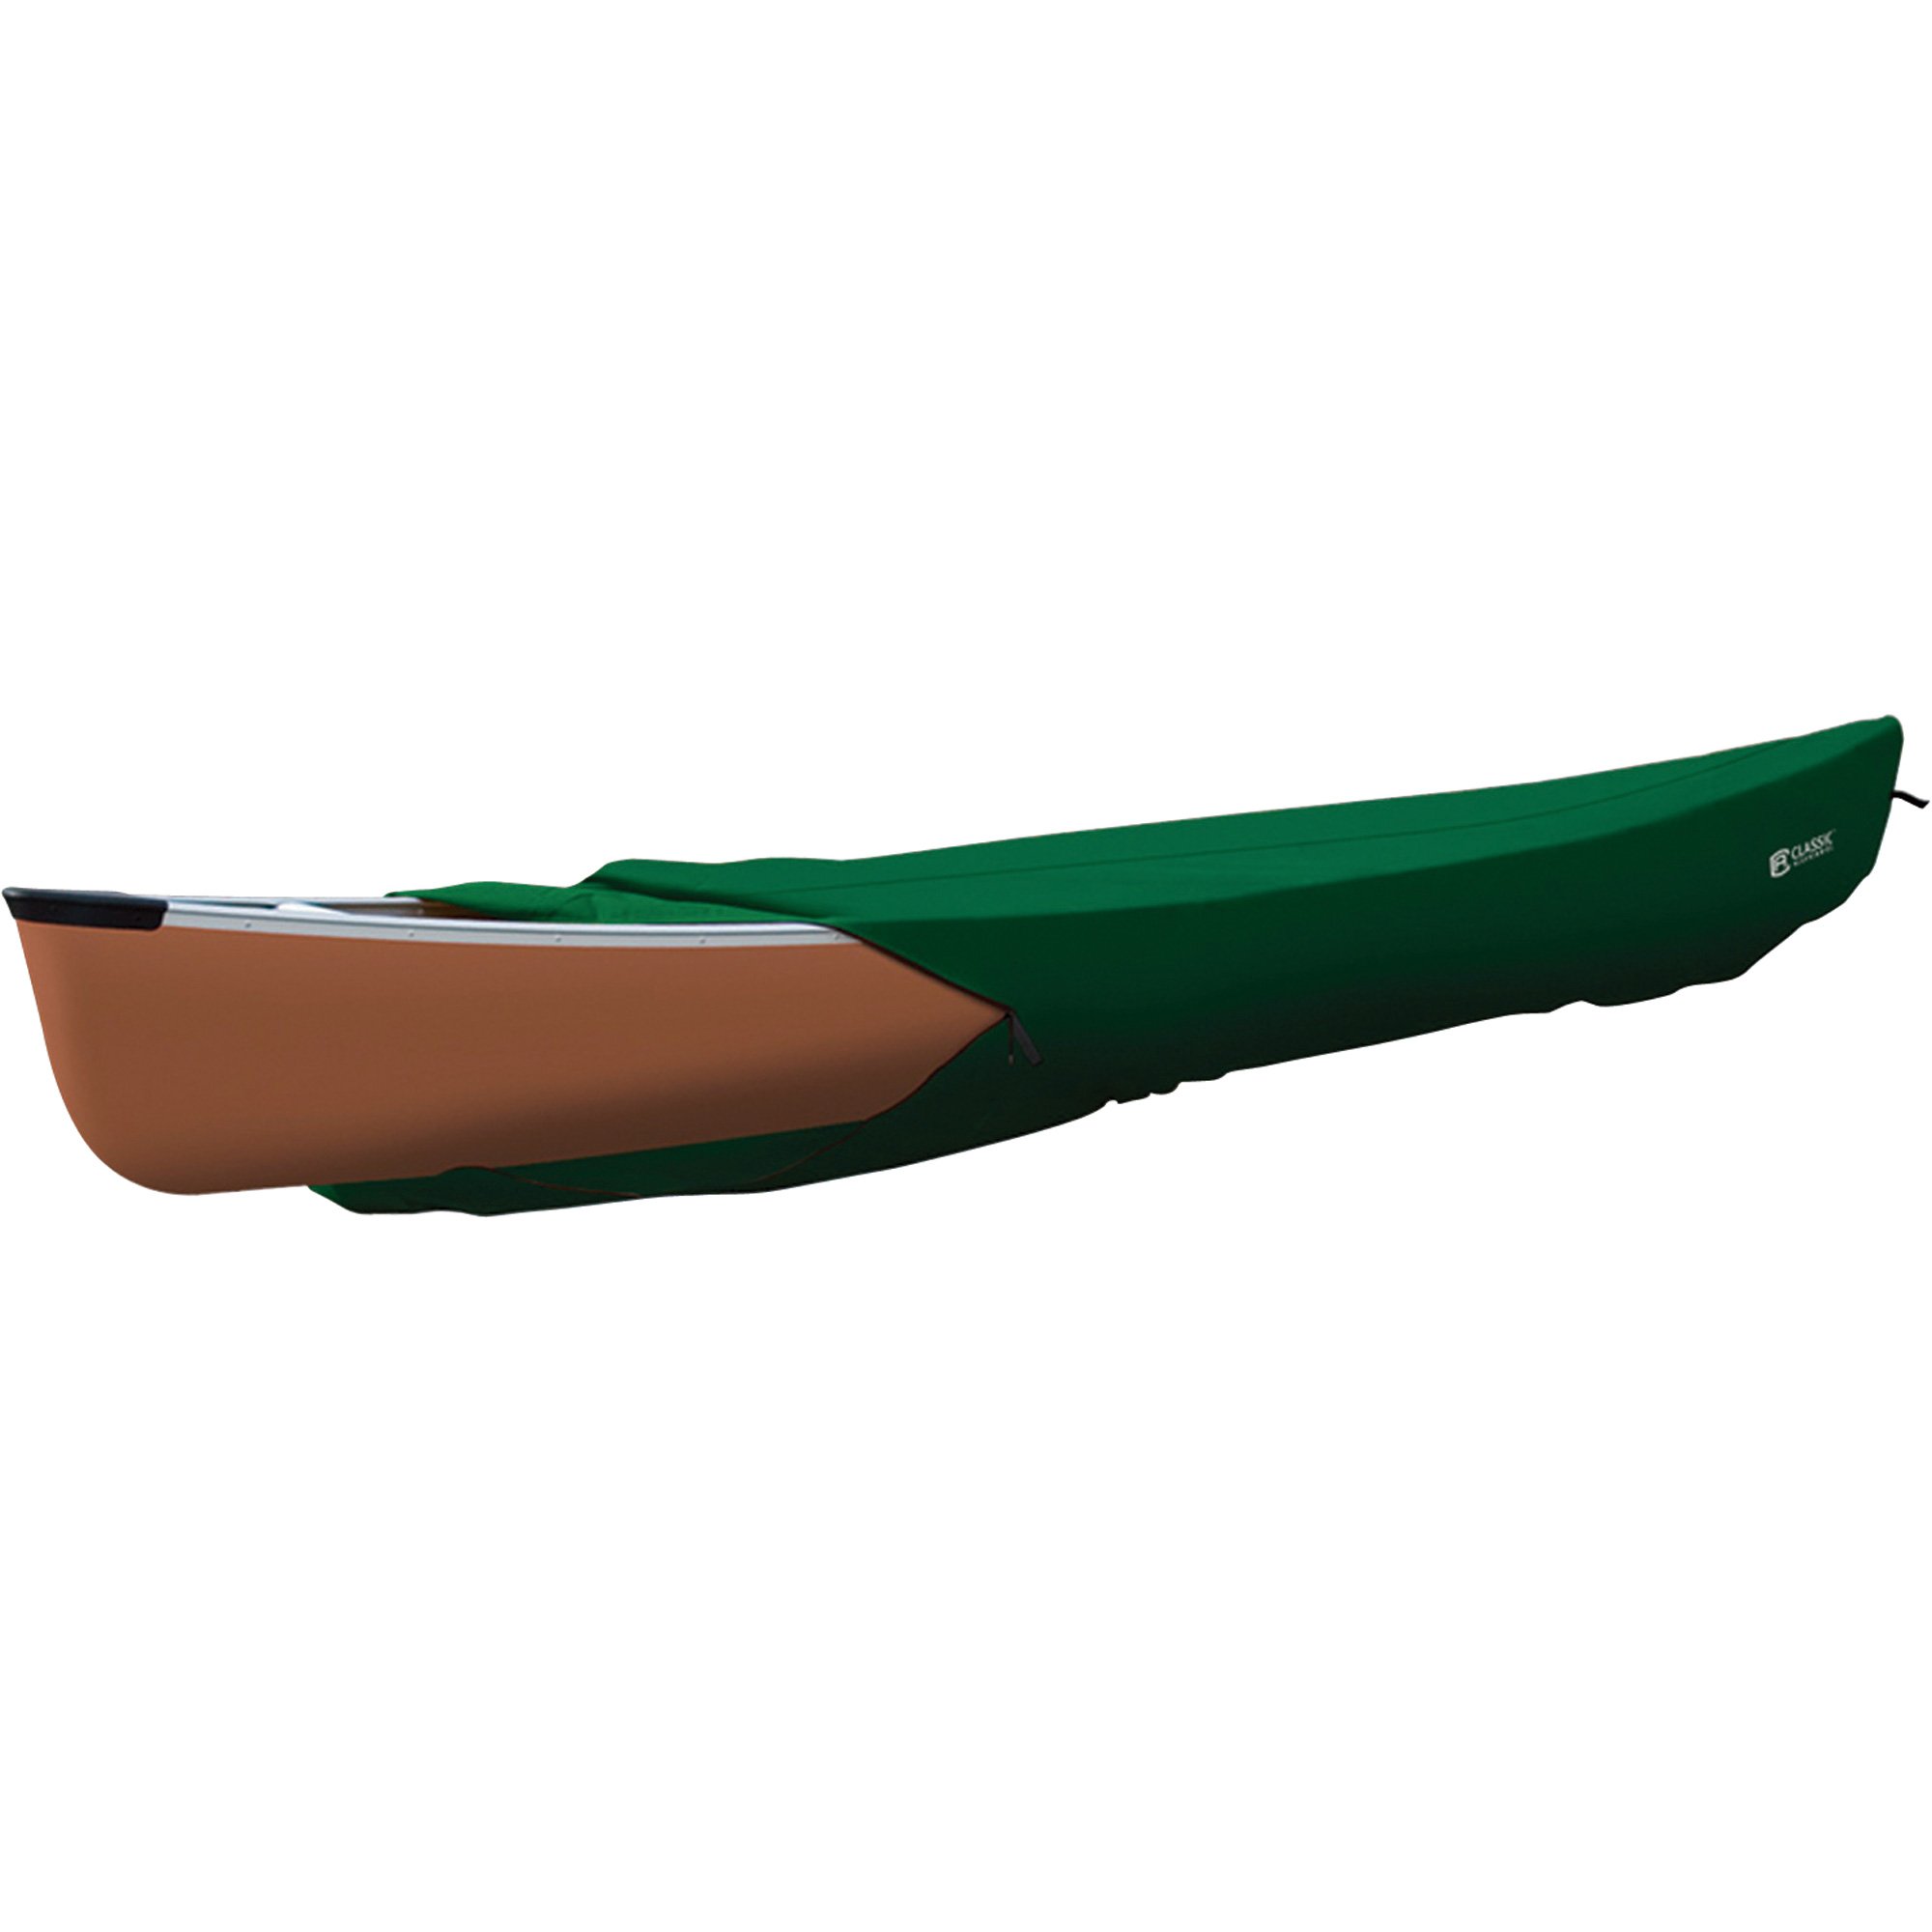 Classic Accessories Canoe/Kayak Cover — Green, Fits Up to 16ft.L Canoes/Kayaks  (Beam Width to 110in.), Model# 82334